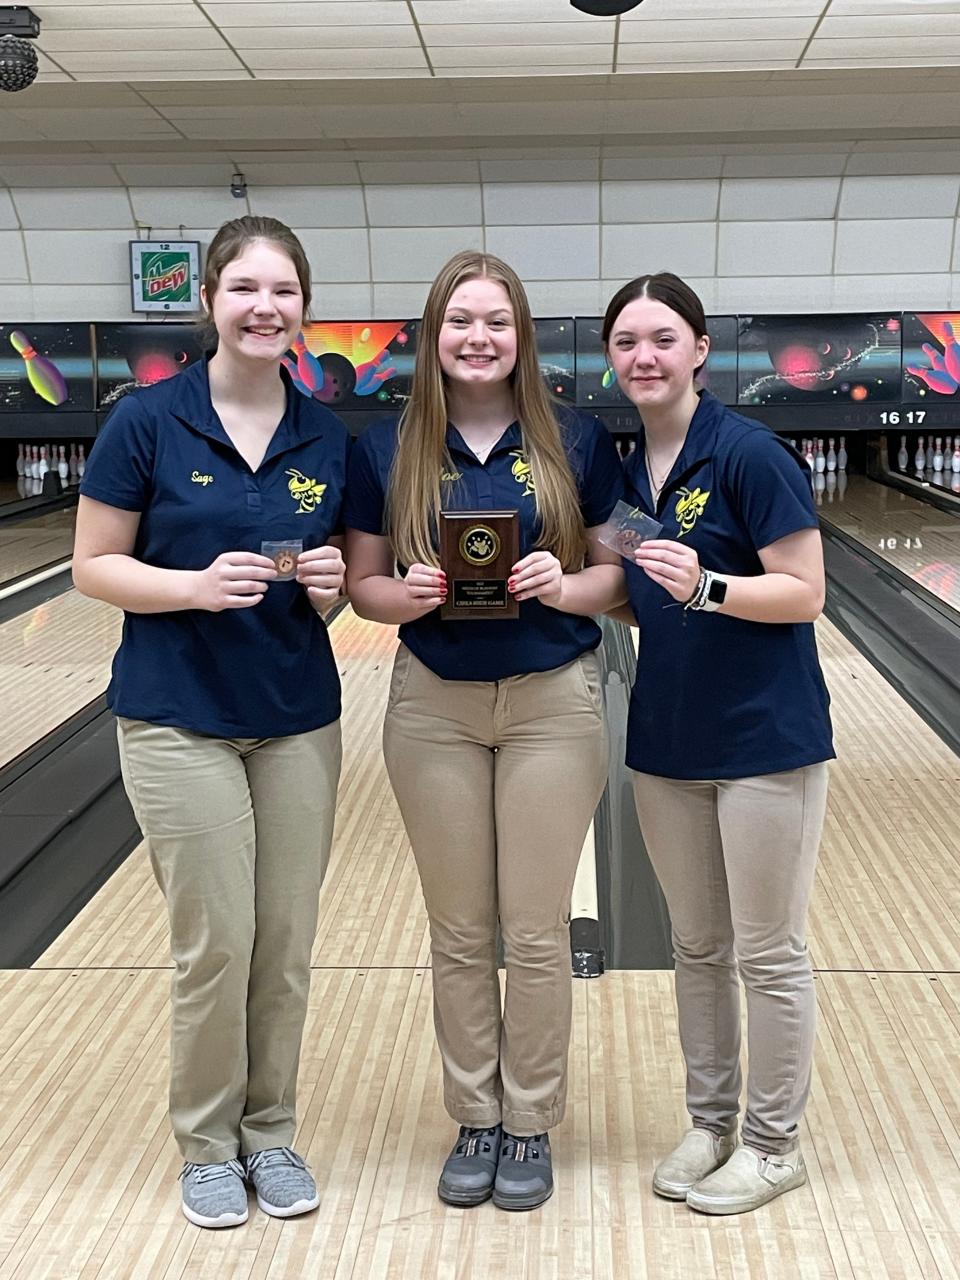 Hillsdale varsity girls bowling had three bowlers place in the top five at the Wildcat Blastoff tournament. Chloe Manifold (middle) led the team with a third place finish. Shalee Van Heerde (right) took fourth and Sage Wickham (left) took fifth.